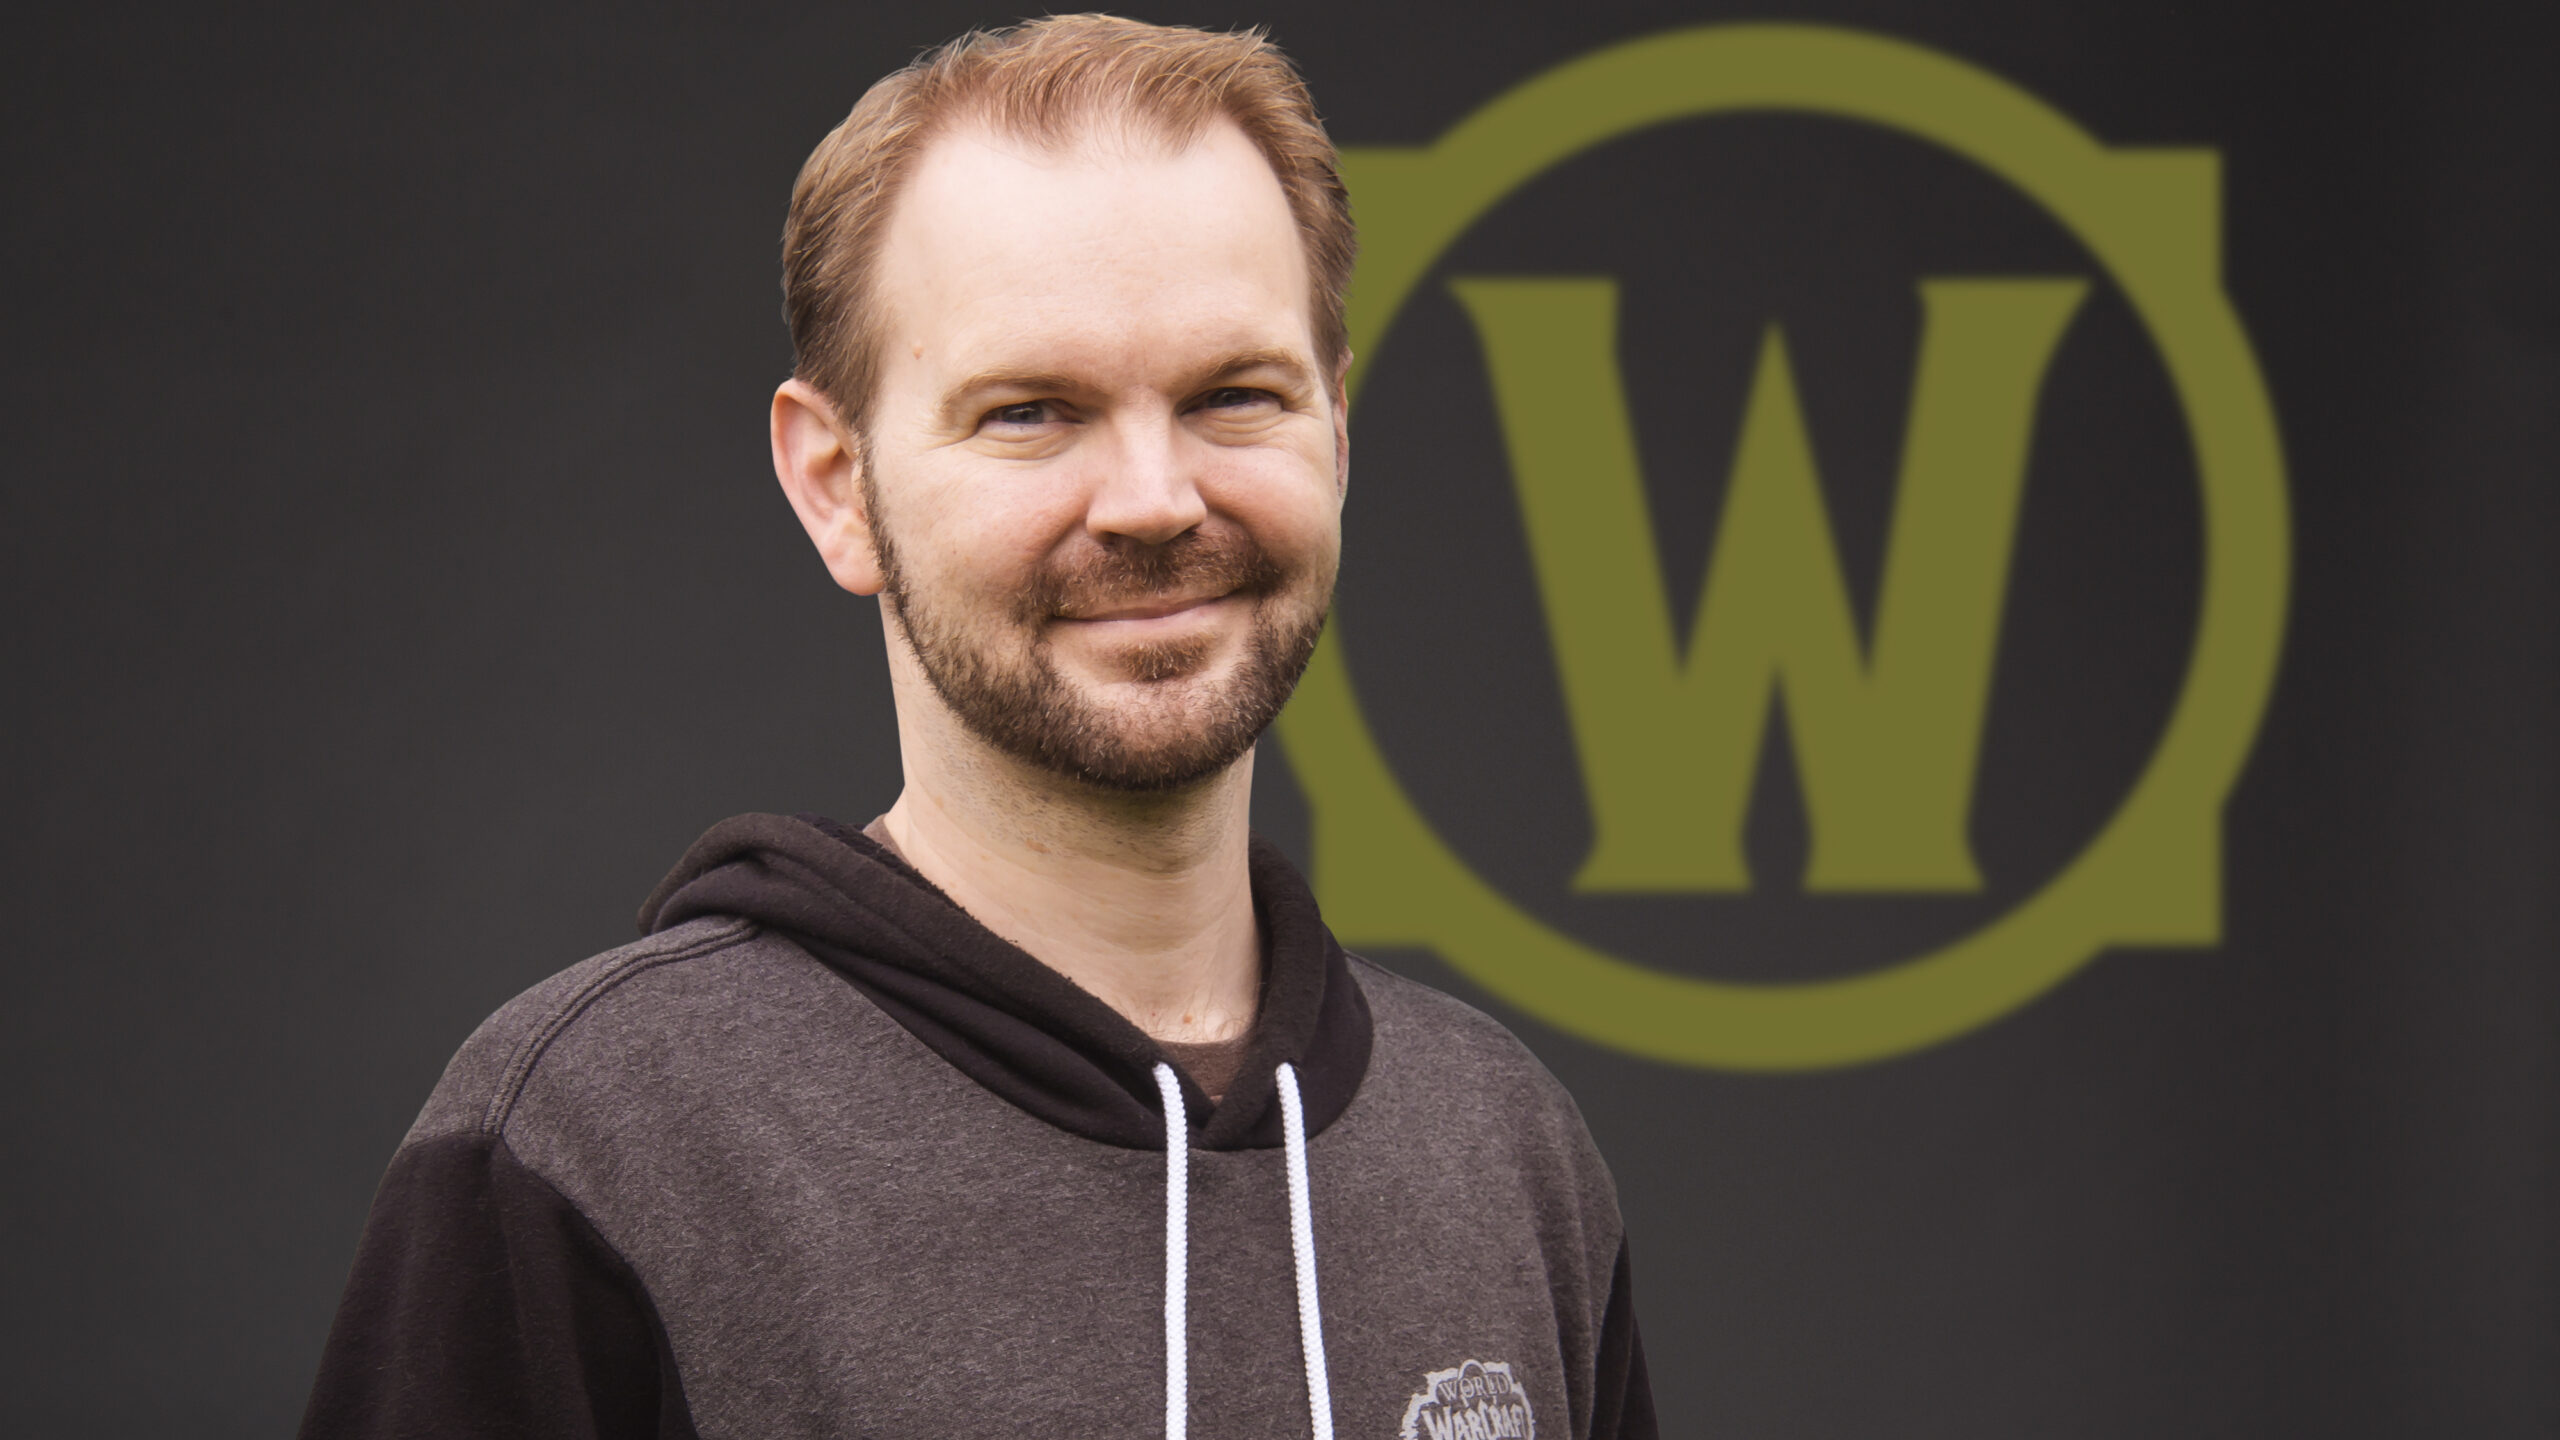 Primary developer behind WoWClassic departs from Blizzard "I can't